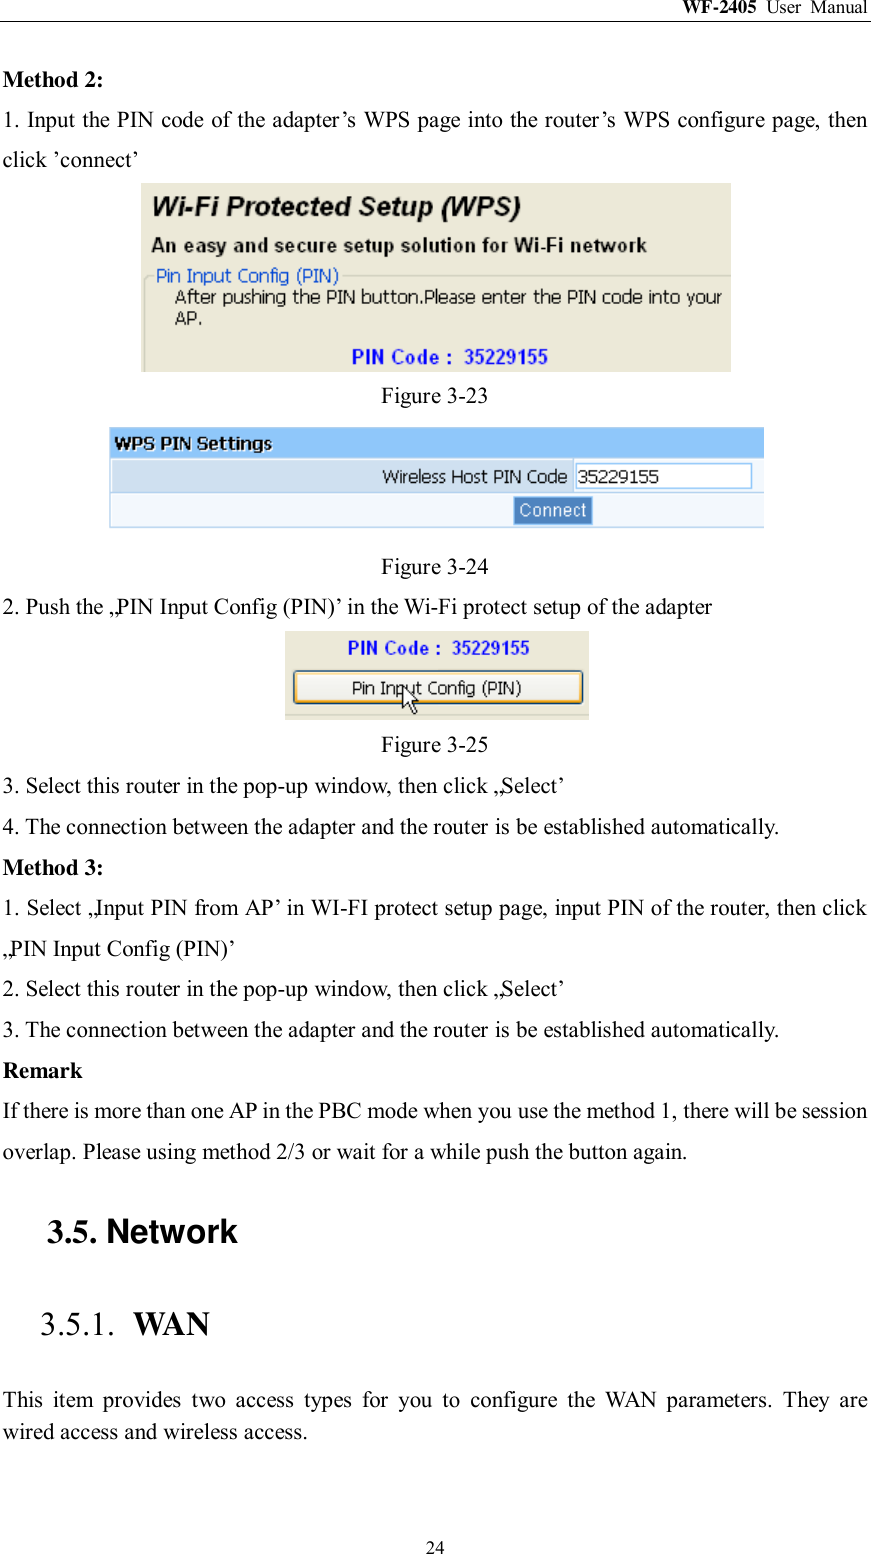 WF-2405  User  Manual  24 Method 2: 1. Input the PIN code of the adapter‟s WPS page into the router‟s WPS configure page, then click ‟connect‟  Figure 3-23  Figure 3-24 2. Push the „PIN Input Config (PIN)‟ in the Wi-Fi protect setup of the adapter  Figure 3-25 3. Select this router in the pop-up window, then click „Select‟ 4. The connection between the adapter and the router is be established automatically. Method 3: 1. Select „Input PIN from AP‟ in WI-FI protect setup page, input PIN of the router, then click „PIN Input Config (PIN)‟ 2. Select this router in the pop-up window, then click „Select‟ 3. The connection between the adapter and the router is be established automatically. Remark If there is more than one AP in the PBC mode when you use the method 1, there will be session overlap. Please using method 2/3 or wait for a while push the button again. 3.5. Network 3.5.1. WAN This  item  provides  two  access  types  for  you  to  configure  the  WAN  parameters.  They  are wired access and wireless access. 